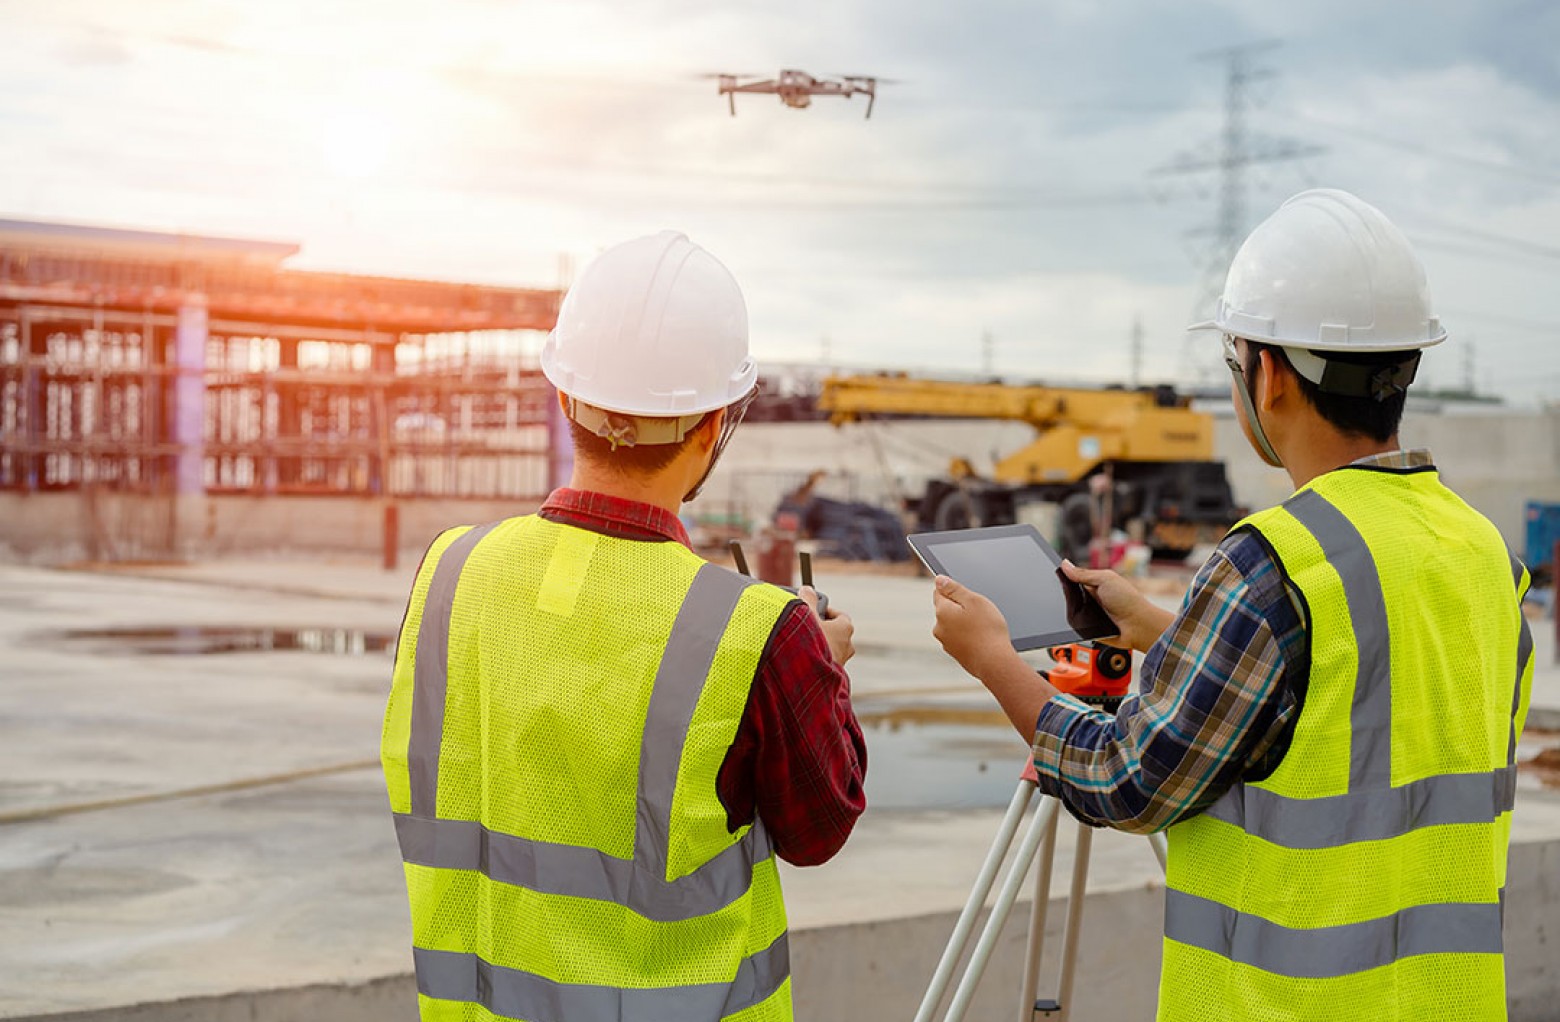 Two construction workers surveying a job site with a drone.